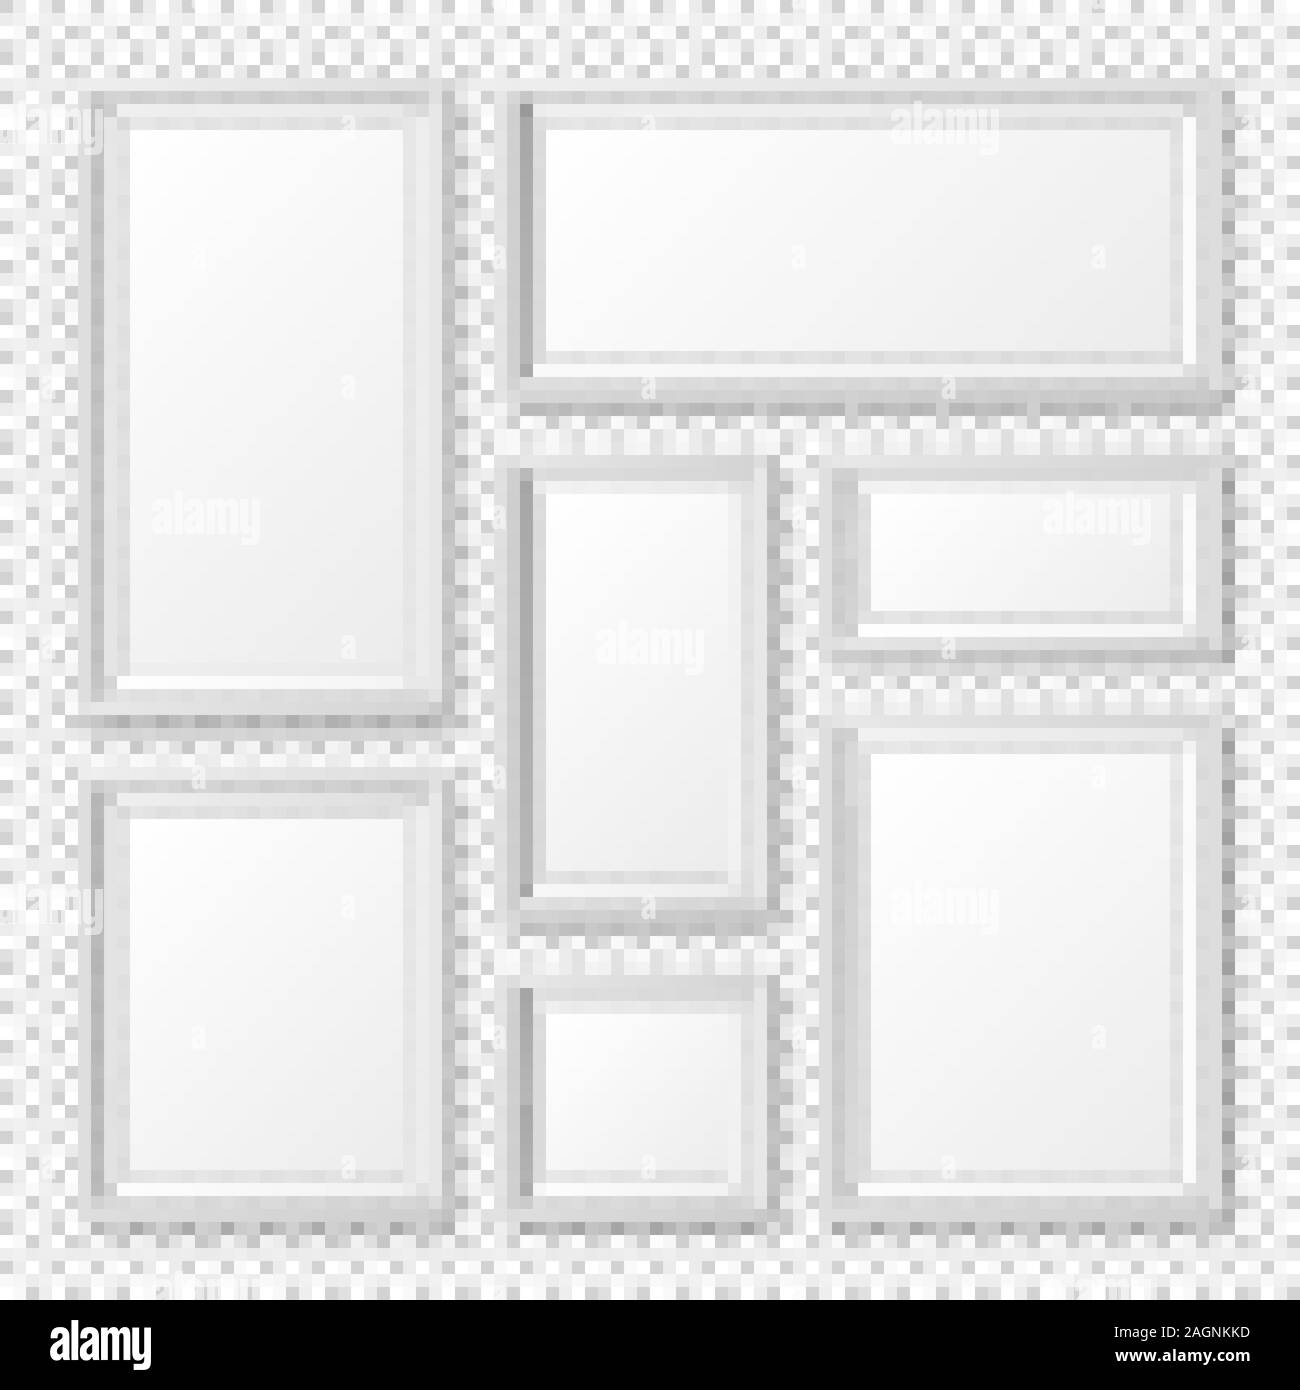 https://c8.alamy.com/comp/2AGNKKD/realistic-blank-white-picture-frame-with-shadow-collection-isolated-on-transparent-background-modern-poster-mockup-empty-photo-frame-for-art-gallery-2AGNKKD.jpg